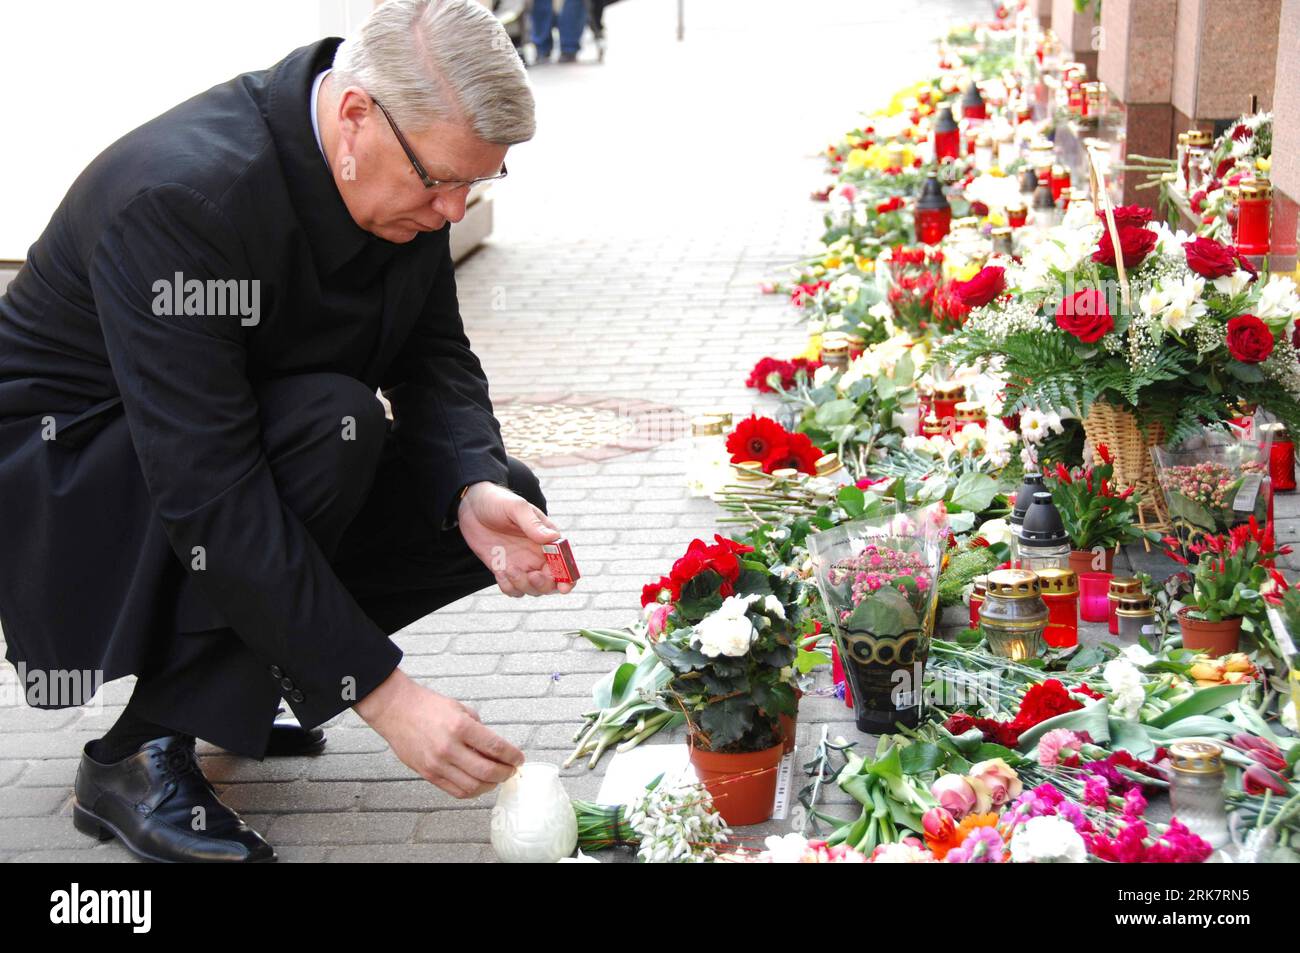 Bildnummer: 53936080  Datum: 12.04.2010  Copyright: imago/Xinhua (100412) -- REGA, April 12, 2010 (Xinhua) -- Latvian President Valdis Zatlers lights the candle to mourn for the death of Polish President Lech Kaczynski in the Saturday plane crash in Russia, outside Poland s Embassy to Latvia in Rega, April 12, 2010. Latvia has announced April 12 as a day of national mourning for the victims of the plane crash. (Xinhua/Yang Dehong) (hdt) (1)LATVIA-RIGA-POLAND-PLANE CRASH-MOURNING PUBLICATIONxNOTxINxCHN People Politik Trauer Gedenken Flugzeugabsturz Absturz Flugzeugunglück Unglück premiumd xint Stock Photo